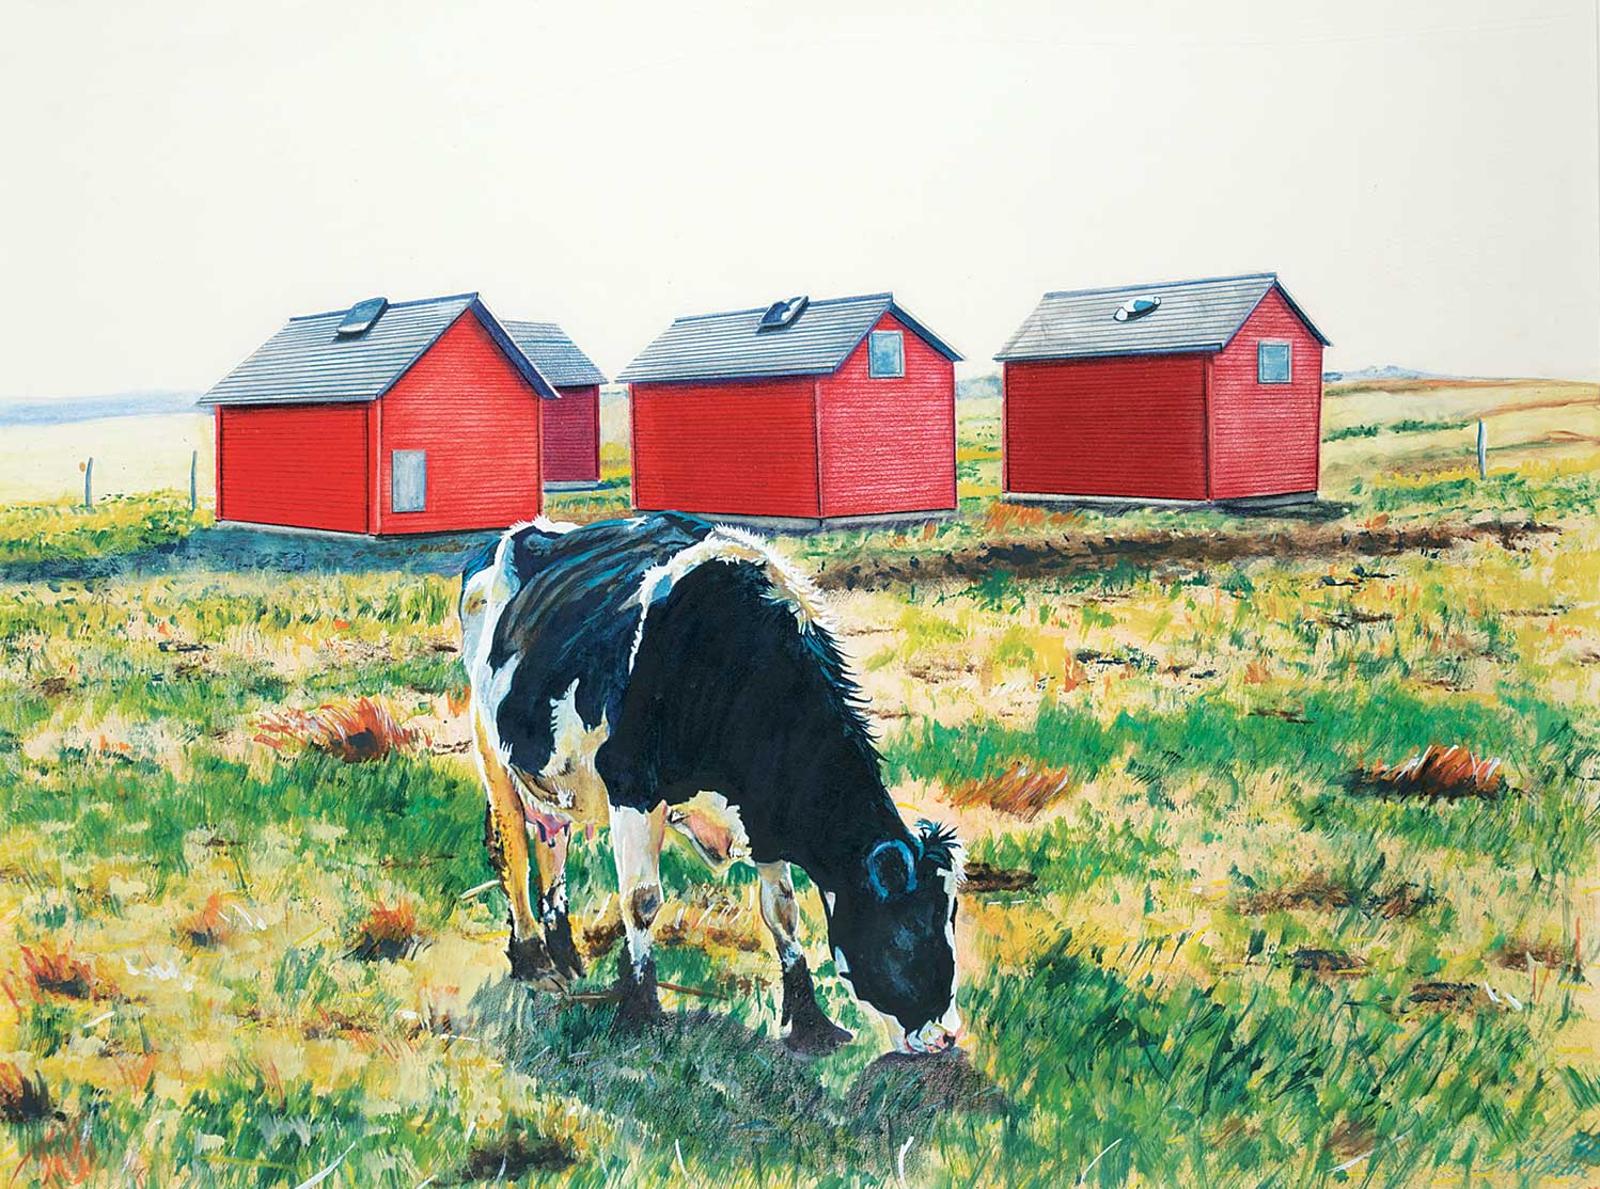 Gary Olson (1946) - Grazing Cow and Four Red Sheds